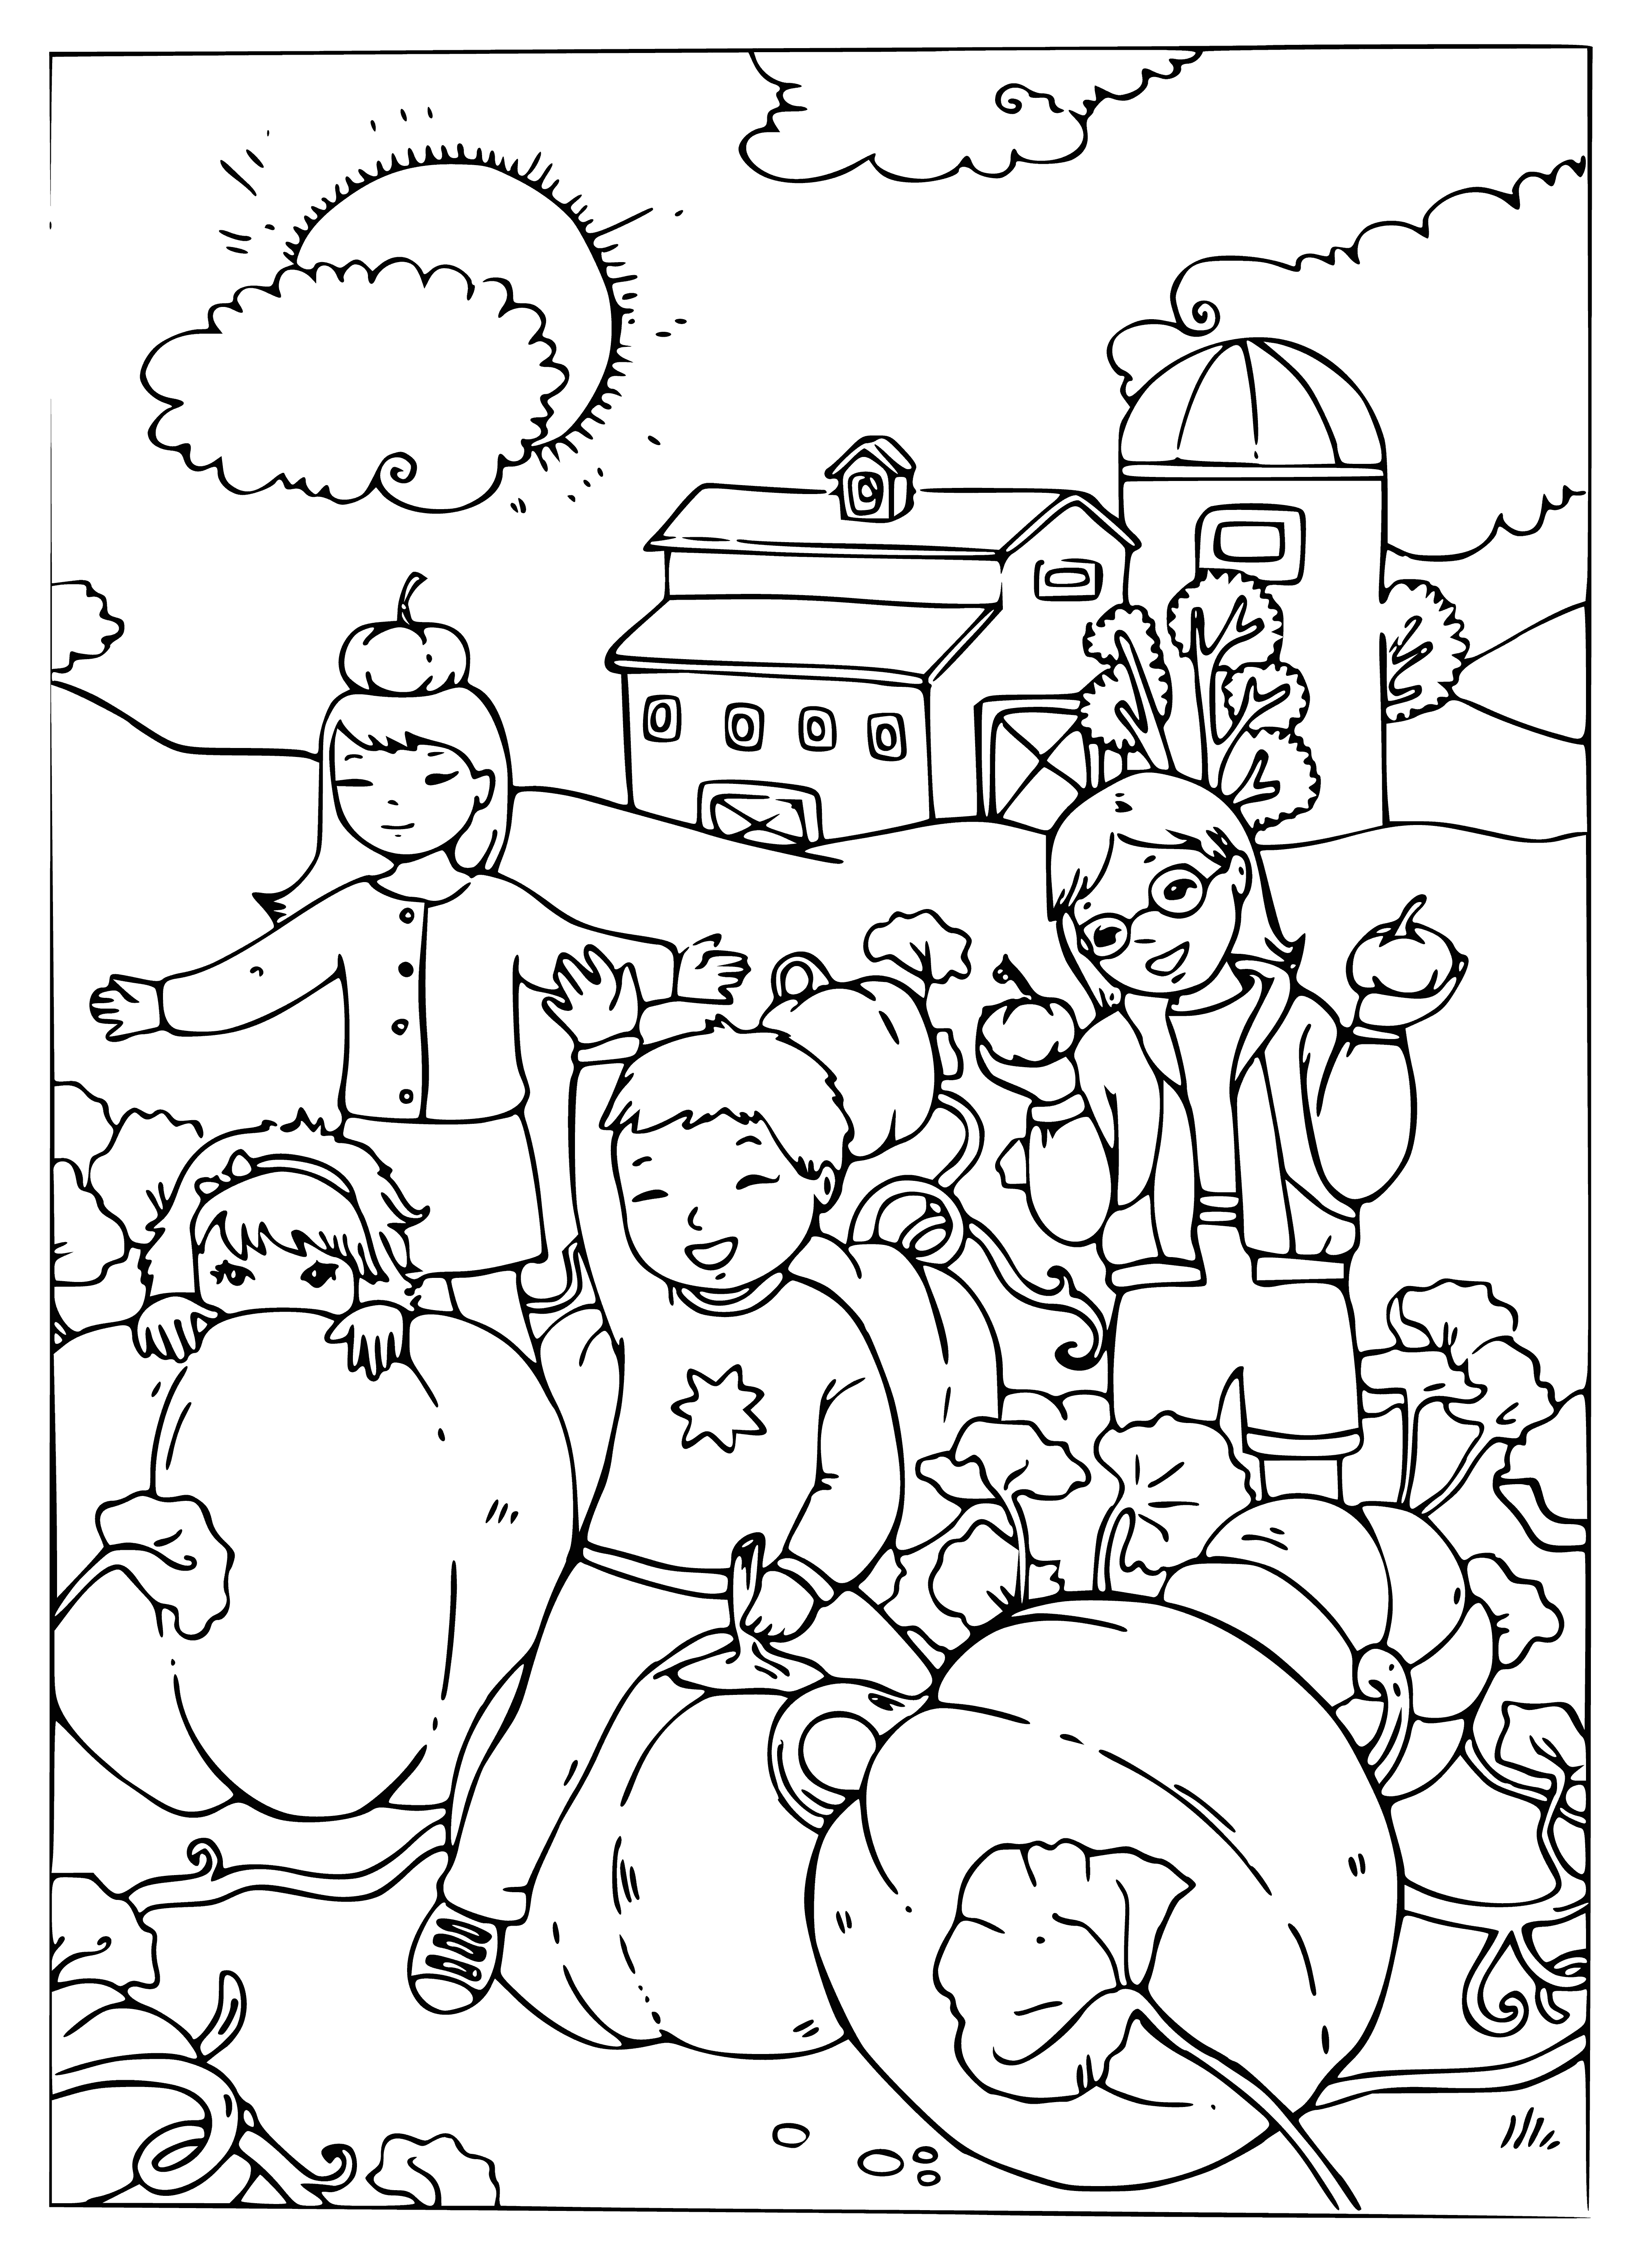 Pumpkin in the garden coloring page